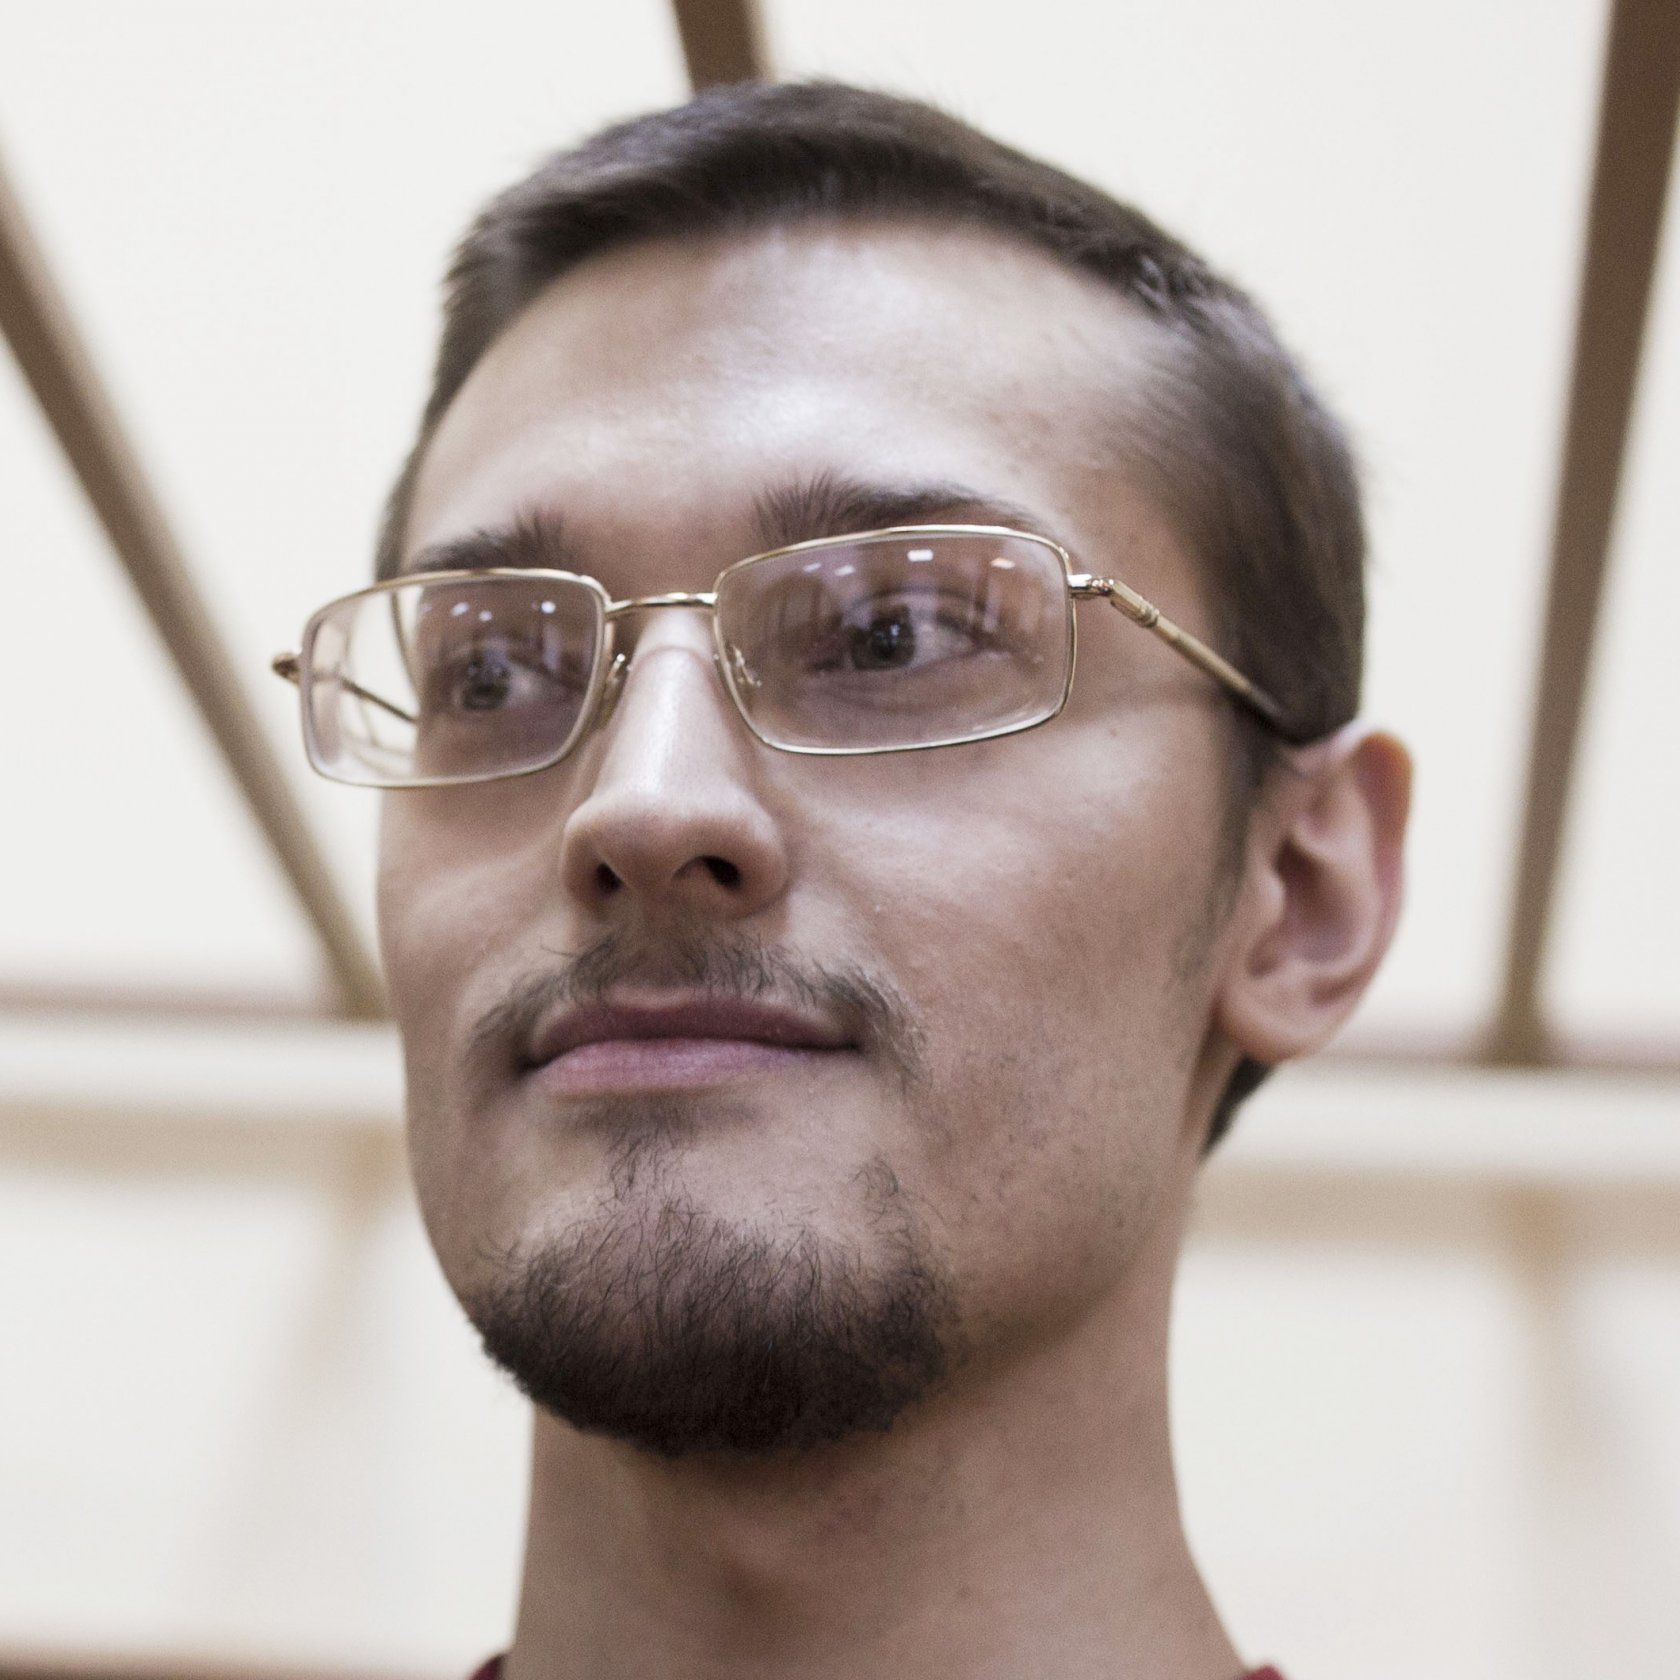 (11) Yaroslav Belousov was arrested on June 9, 2012. He was charged under 2.212 (“mass riots”) and 1.318 (“the use of violence against a government representative”) of the Criminal Code. On February 24, 2014, he was sentenced to 2 years and 4 months in a penal colony. He has a minor child. He was released on 8 September 2014. ~